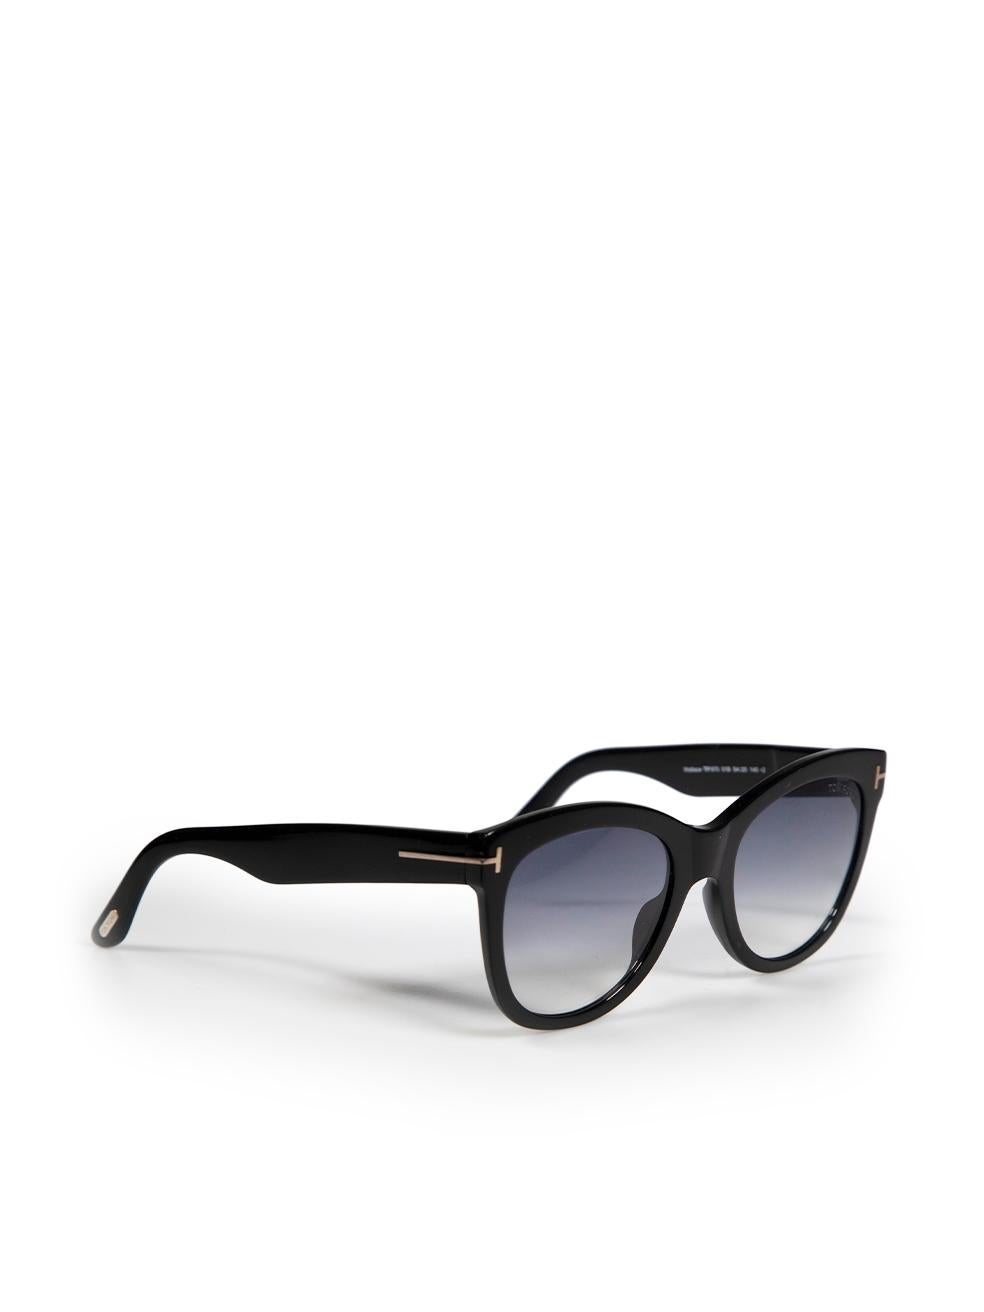 CONDITION is Good. Minor wear to sunglasses is evident. Light wear to the frames with very light scratching found throughout on this used Tom Ford designer resale item. Comes in original case.
 
 Details
 Model: Wallace
 Black
 Plastic
 Sunglasses
